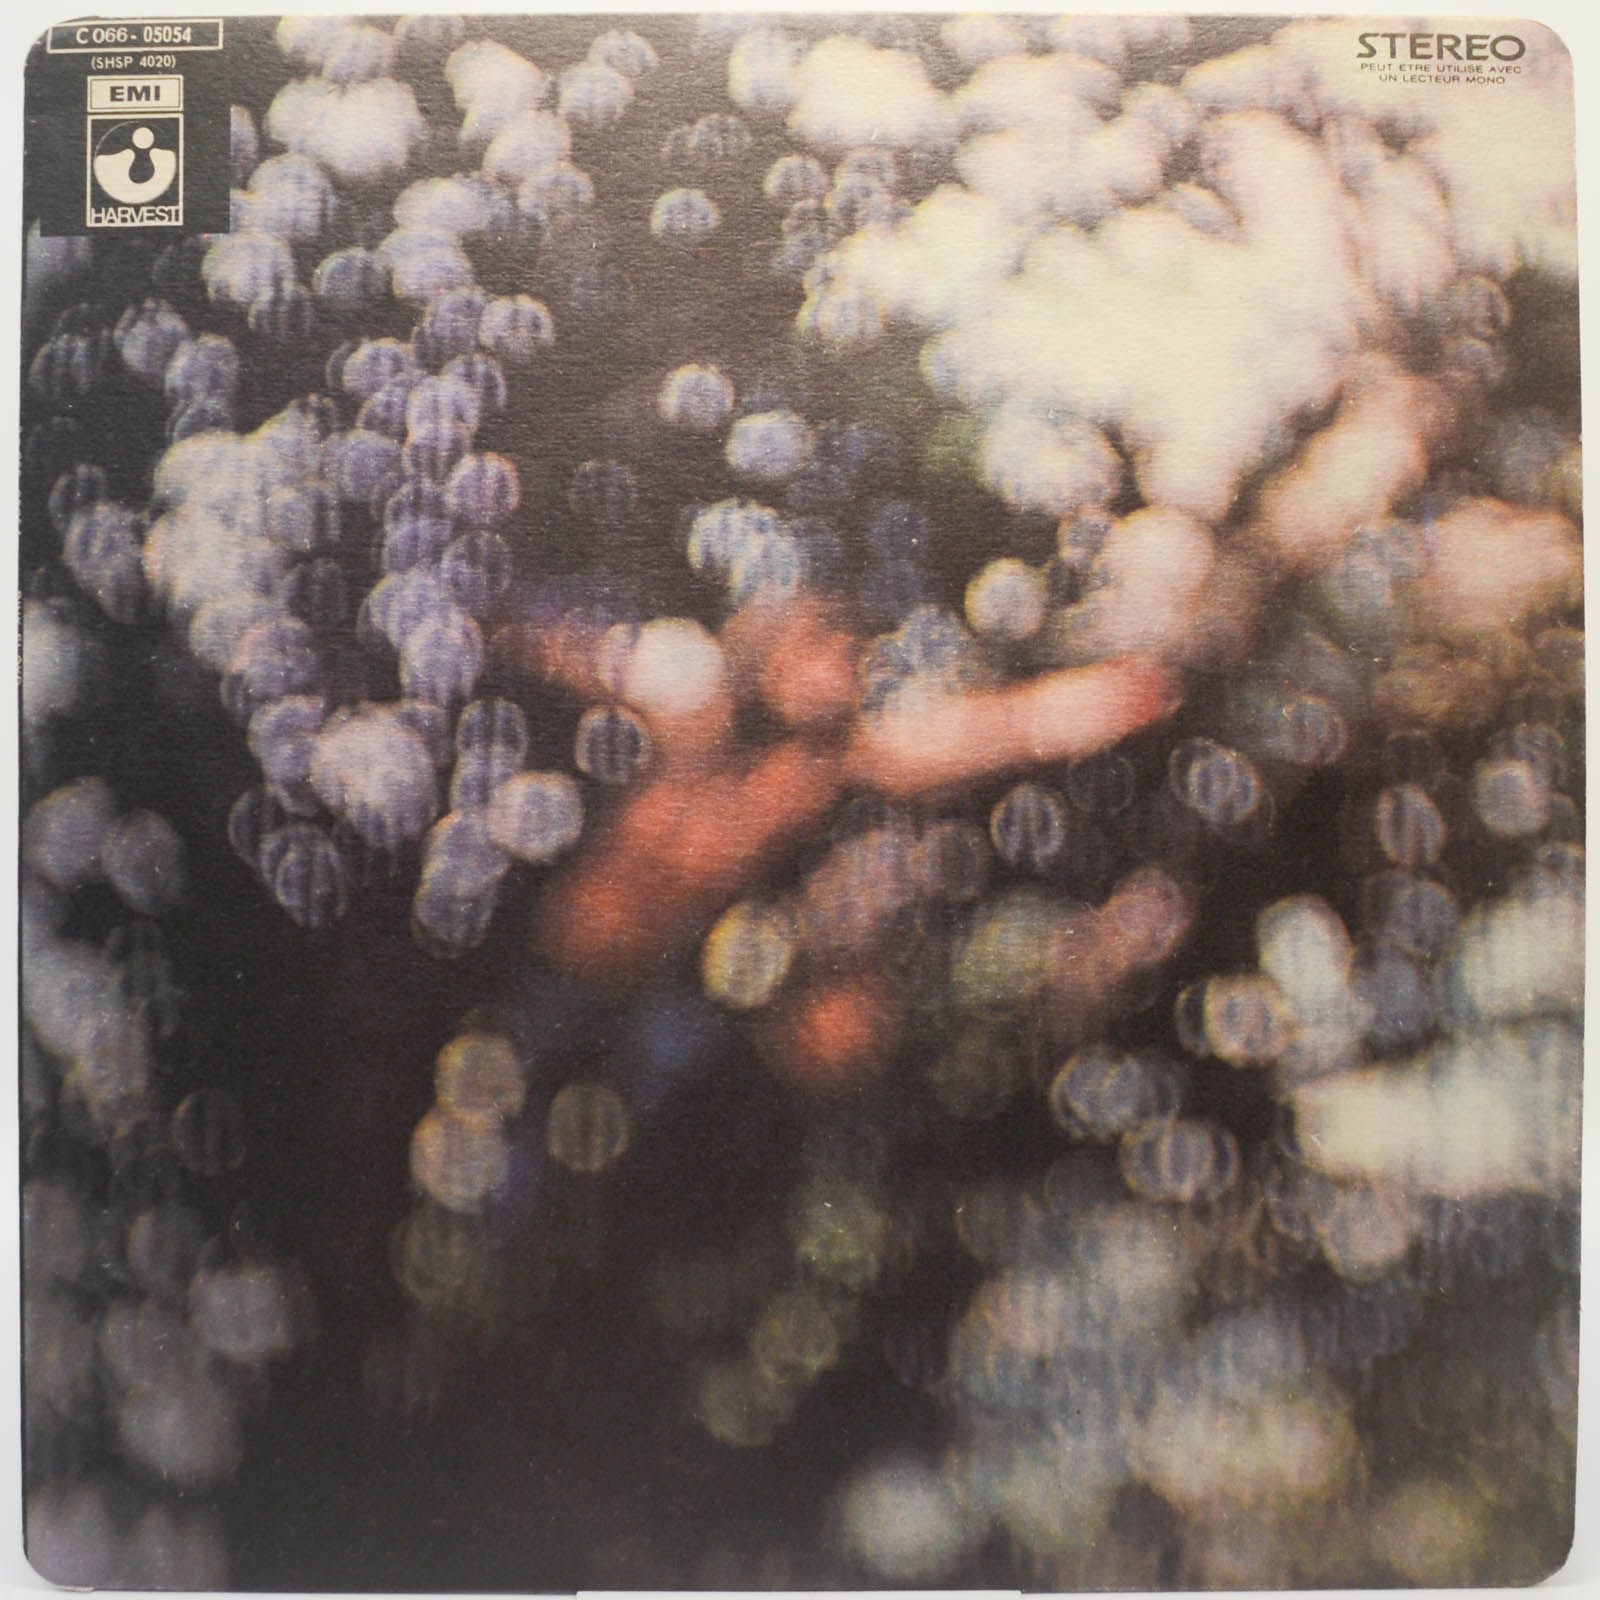 Pink Floyd — Obscured By Clouds, 1972